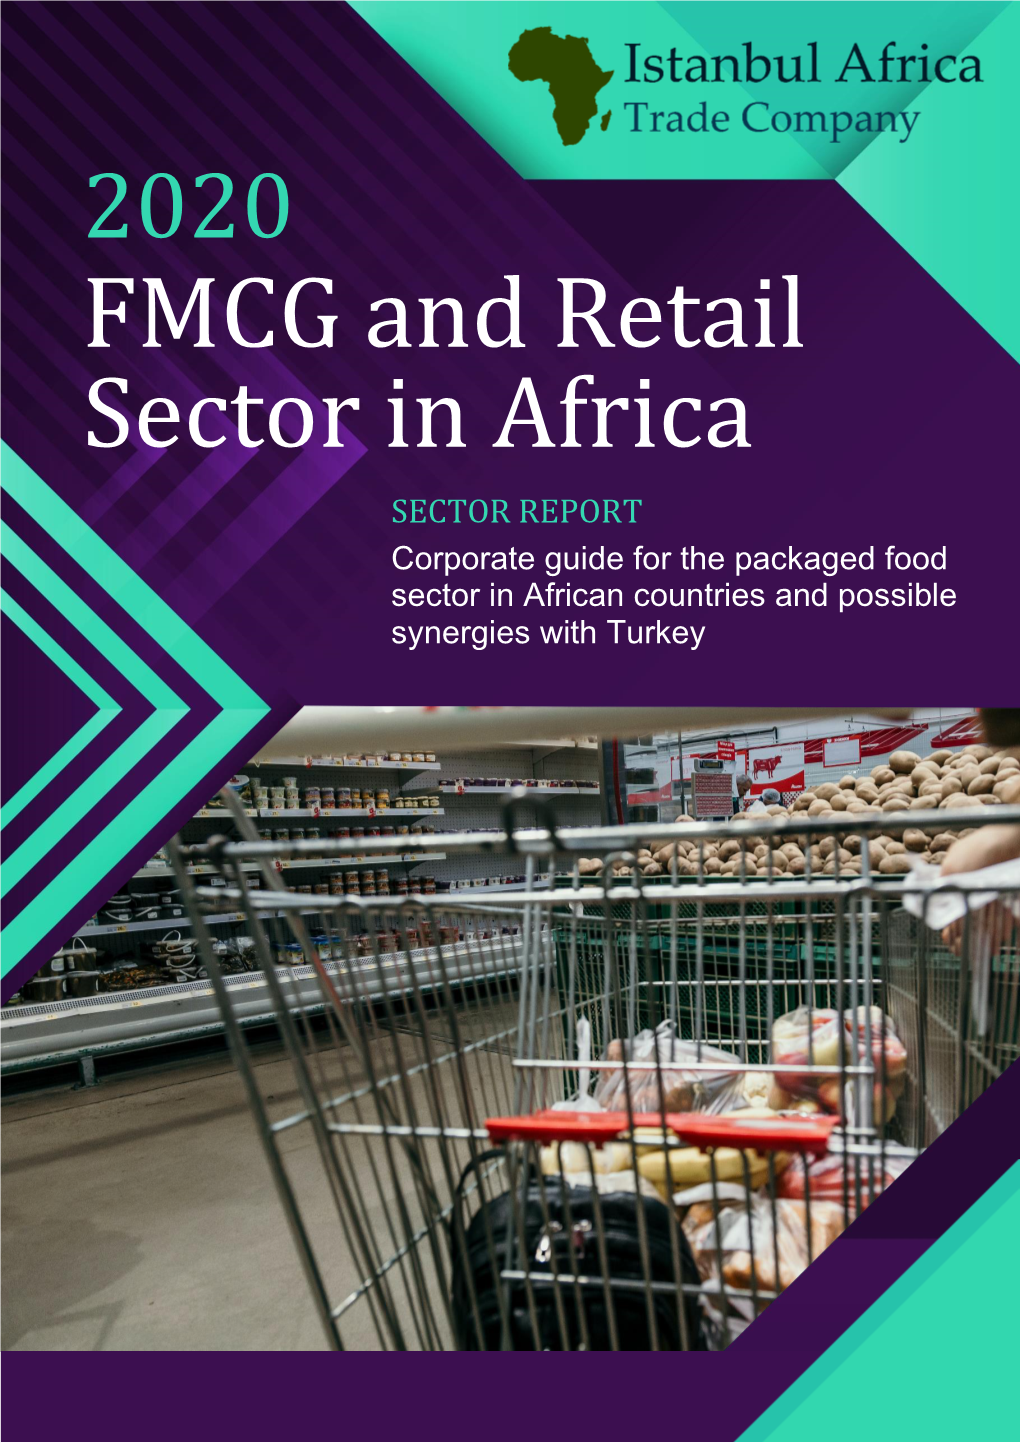 FMCG and Retail Sector in Africa SECTOR REPORT Corporate Guide for the Packaged Food Sector in African Countries and Possible Synergies with Turkey